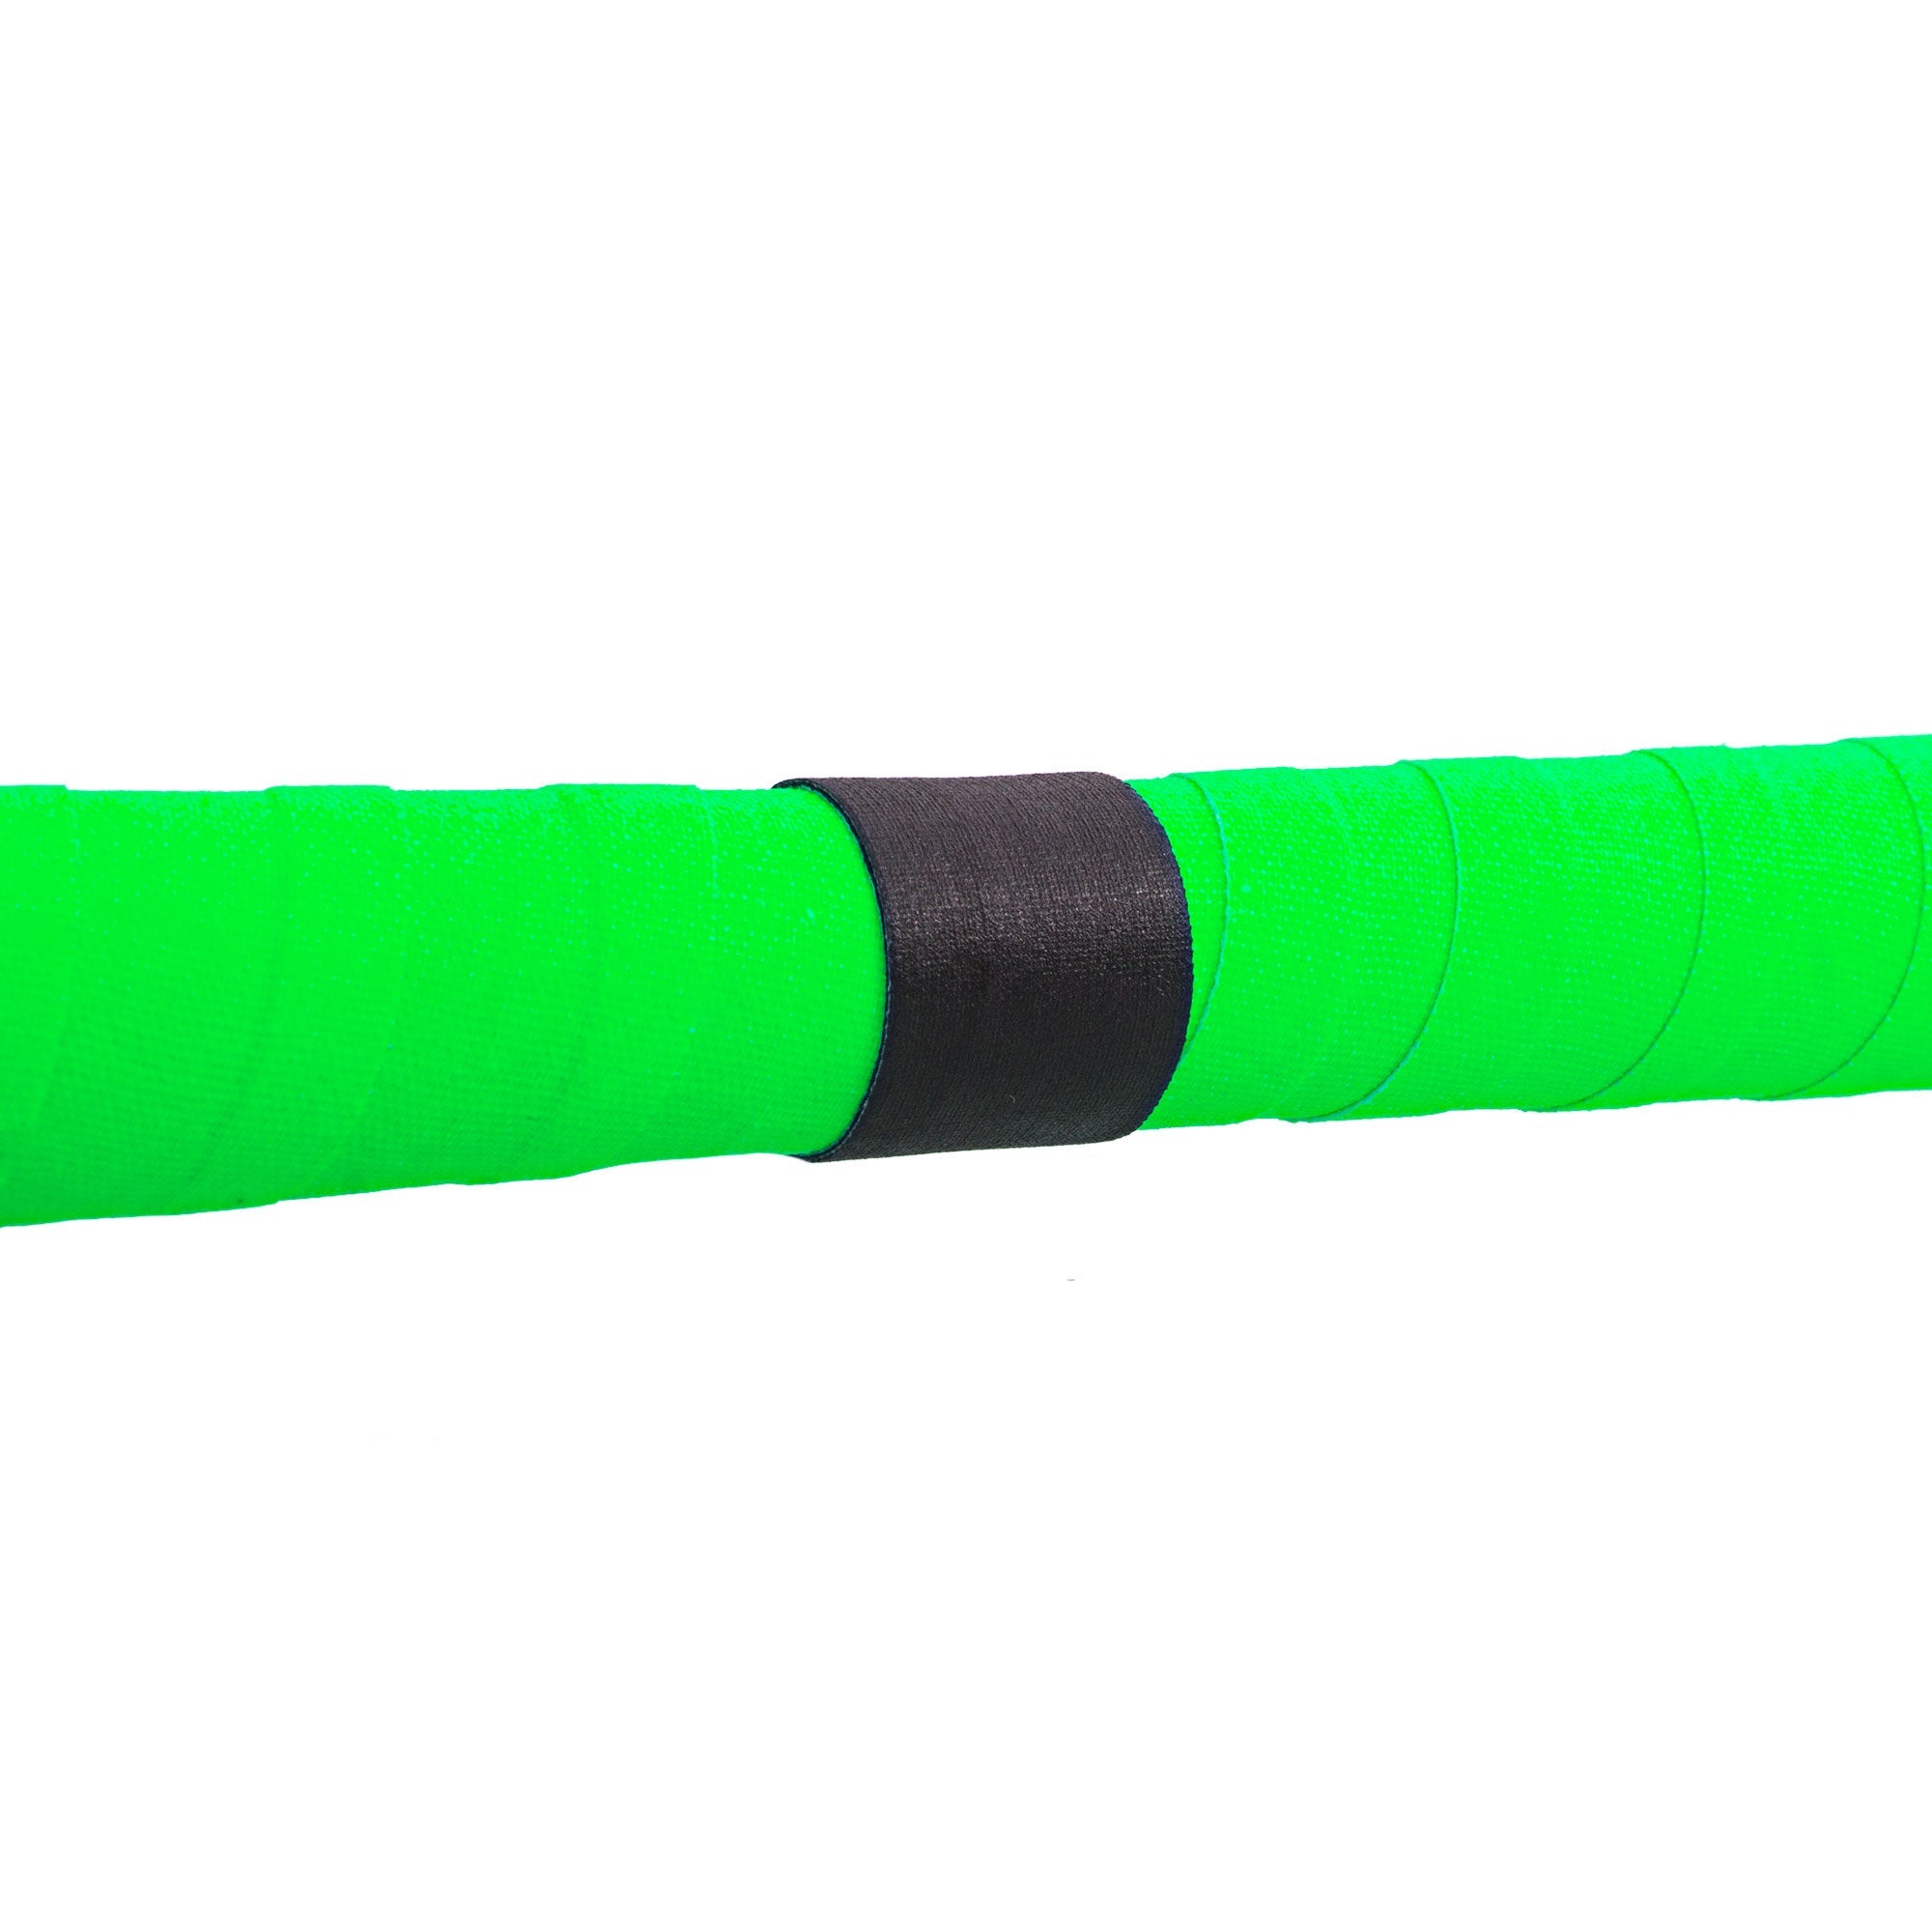 A close up of the centre of the green devilstick.